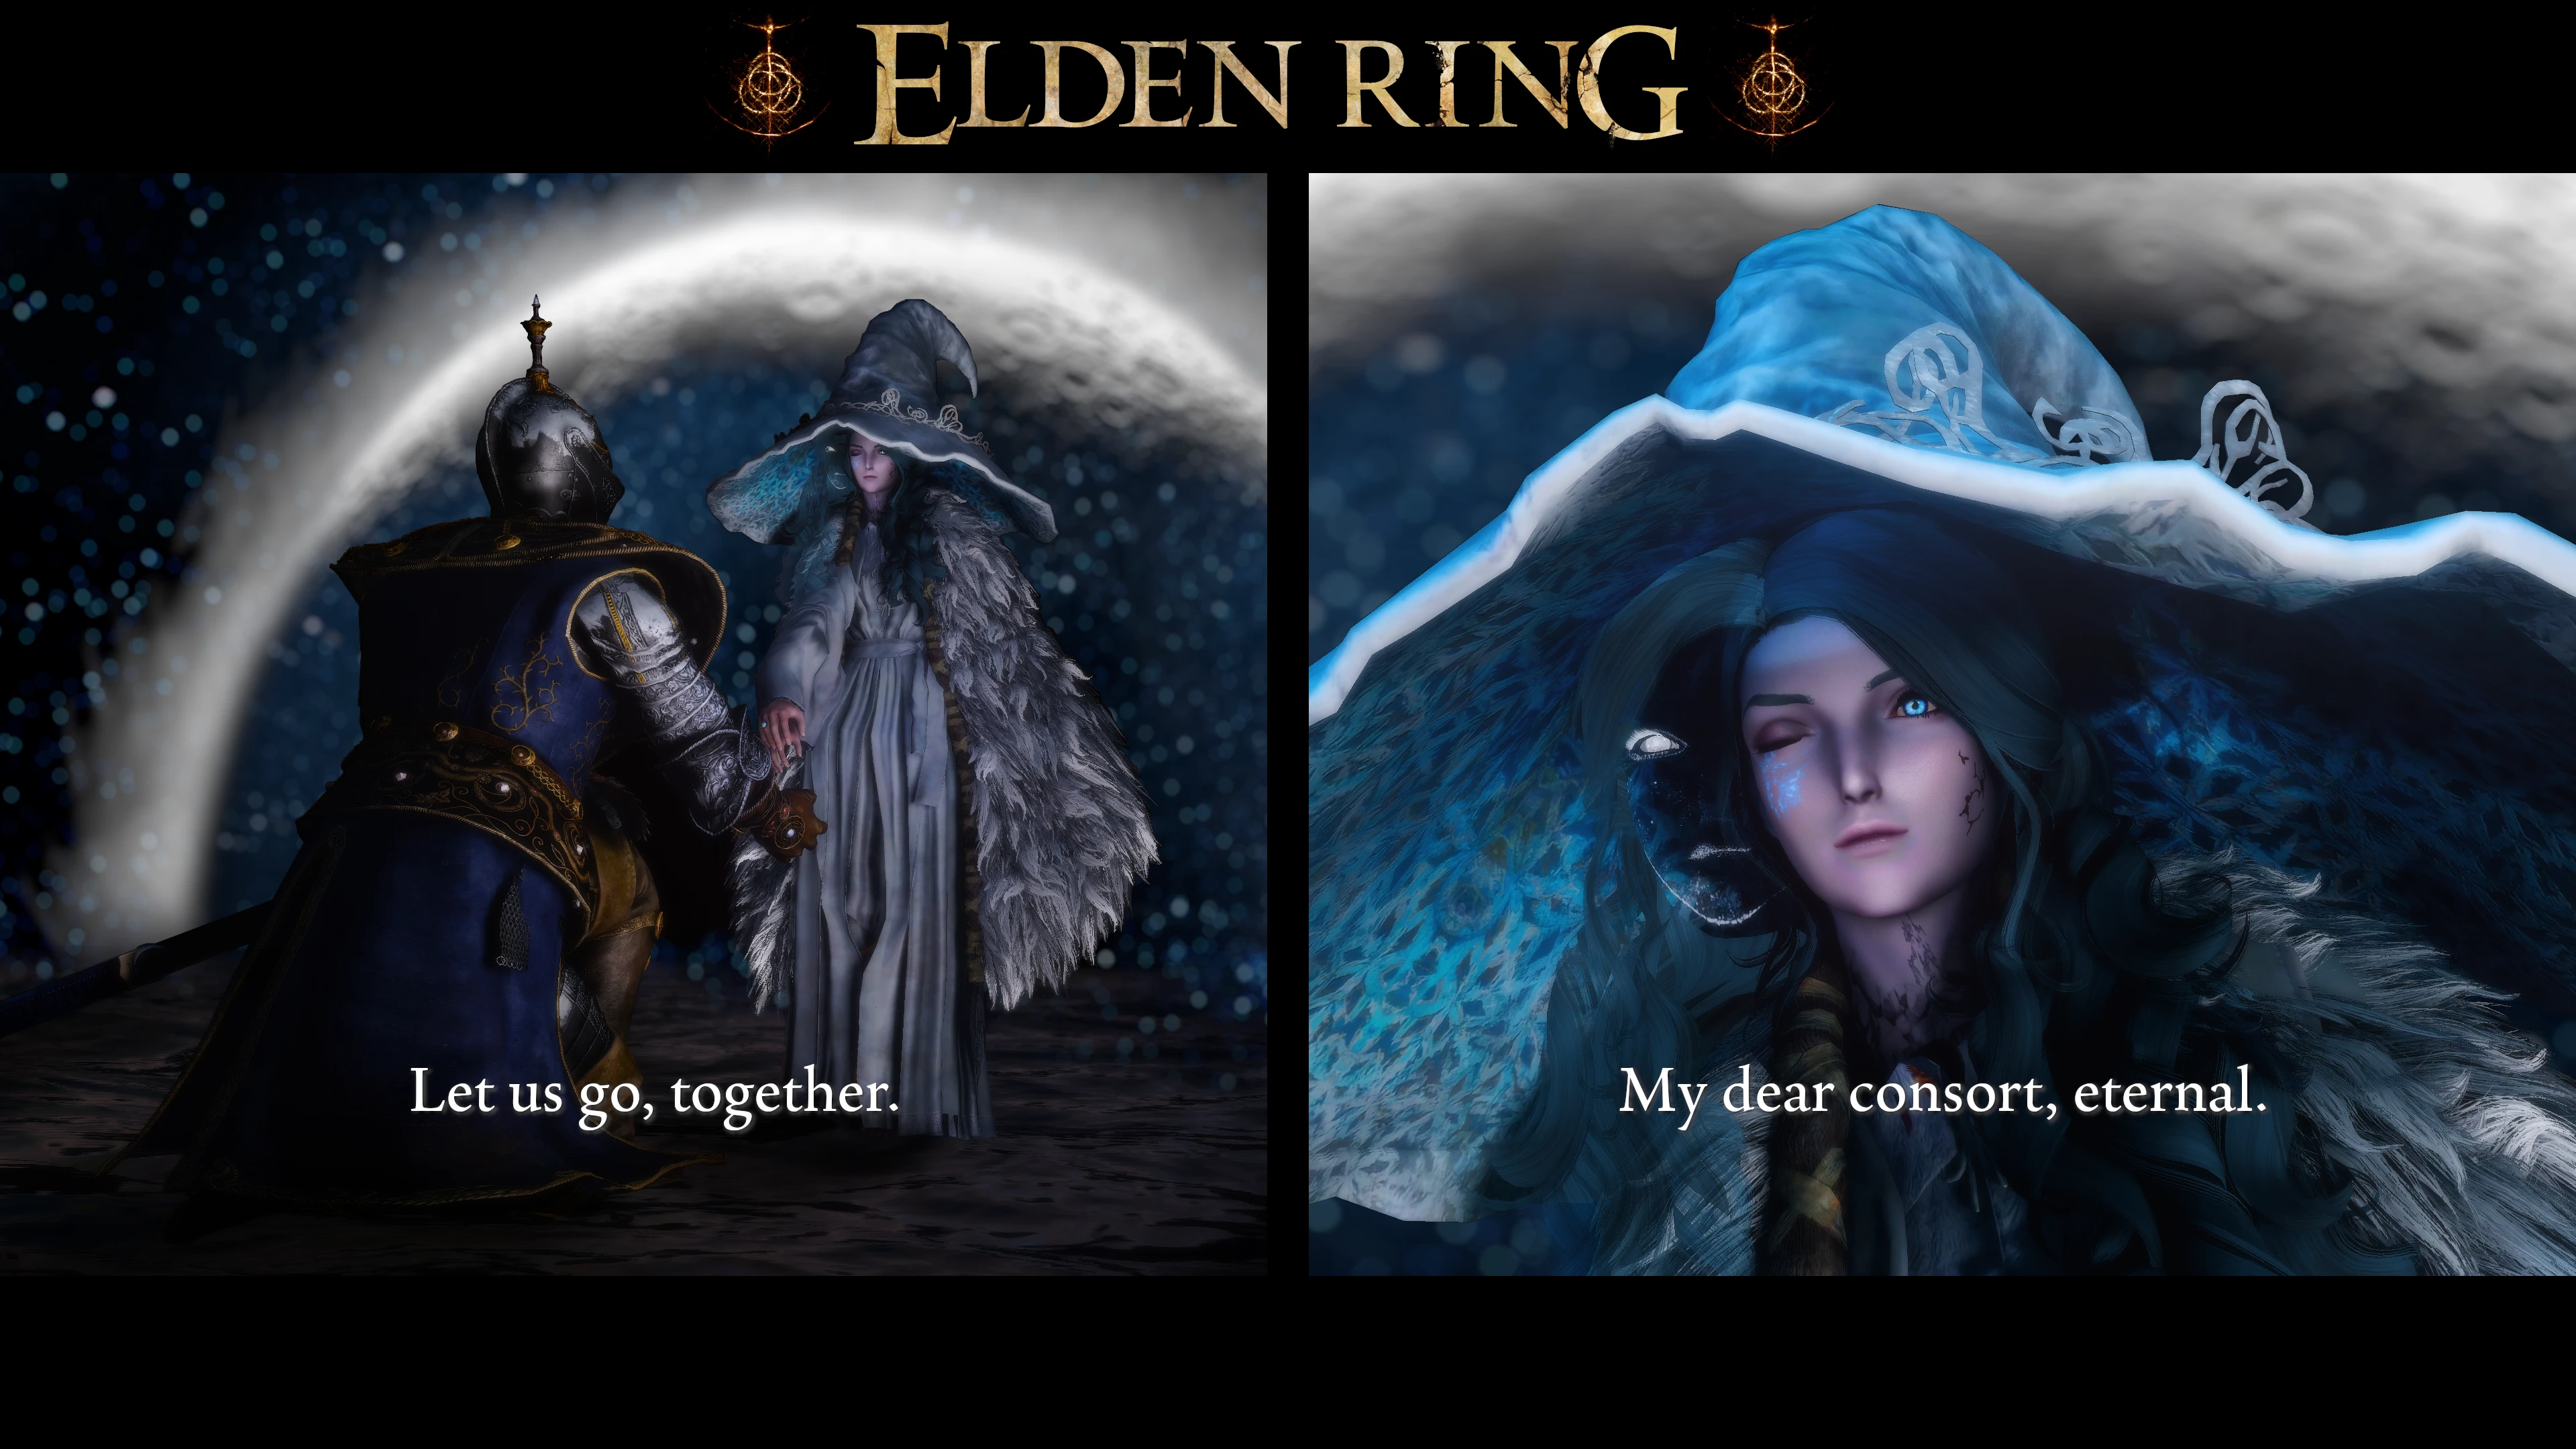 Ranni the Witch (Elden Ring): Image Gallery (List View)